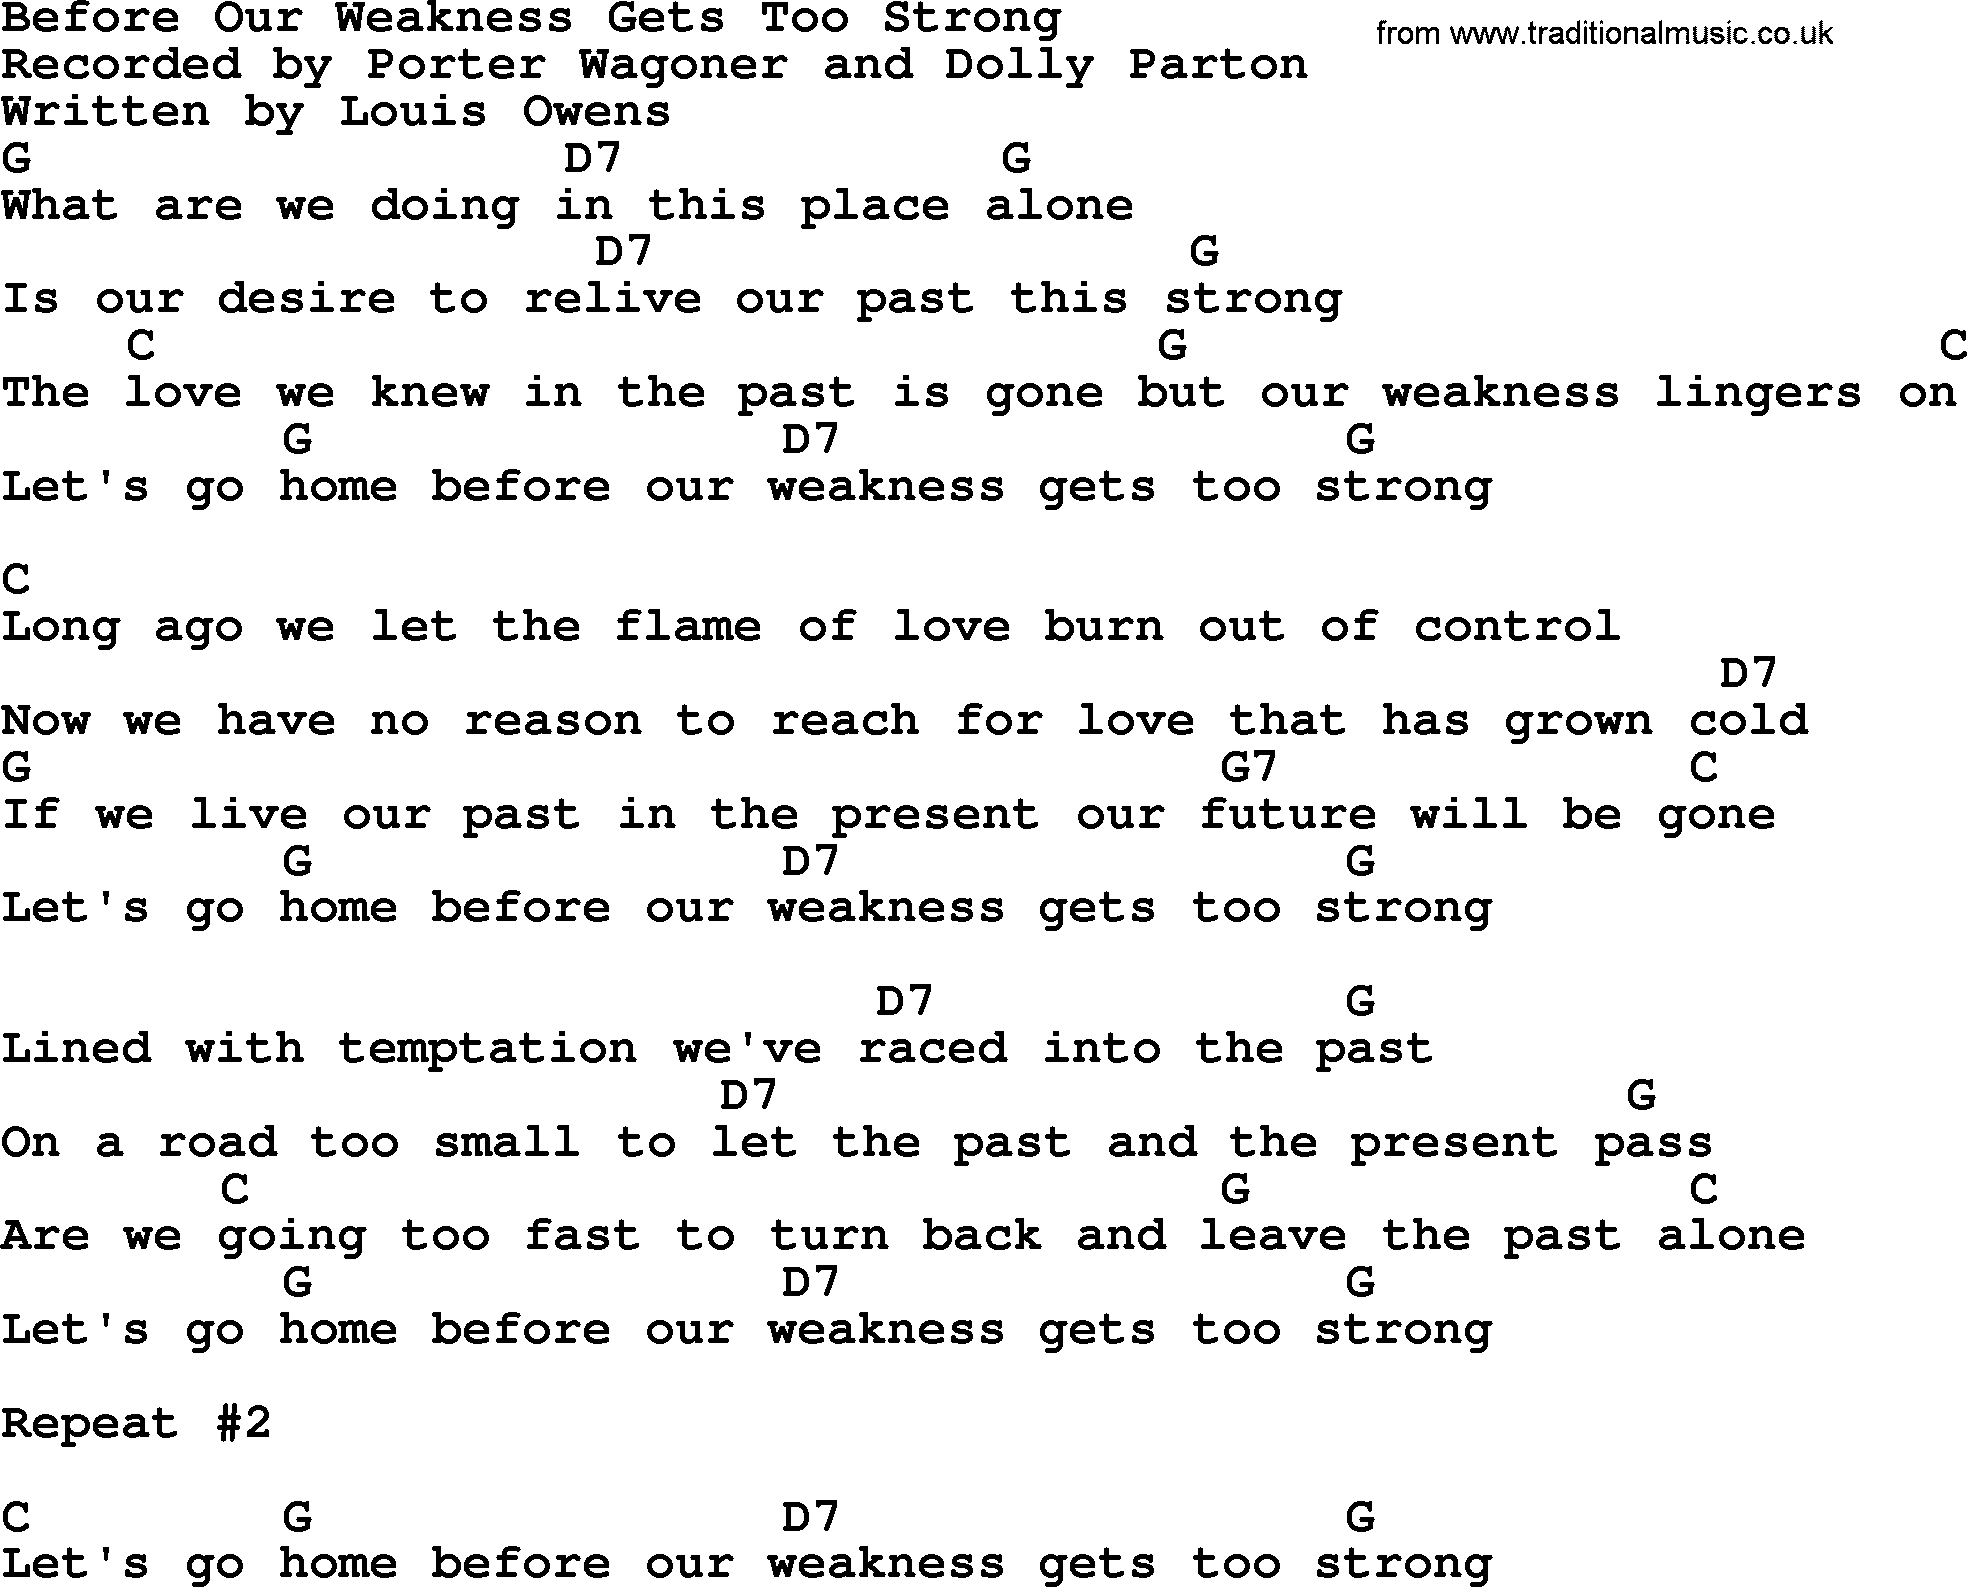 Dolly Parton song Before Our Weakness Gets Too Strong, lyrics and chords